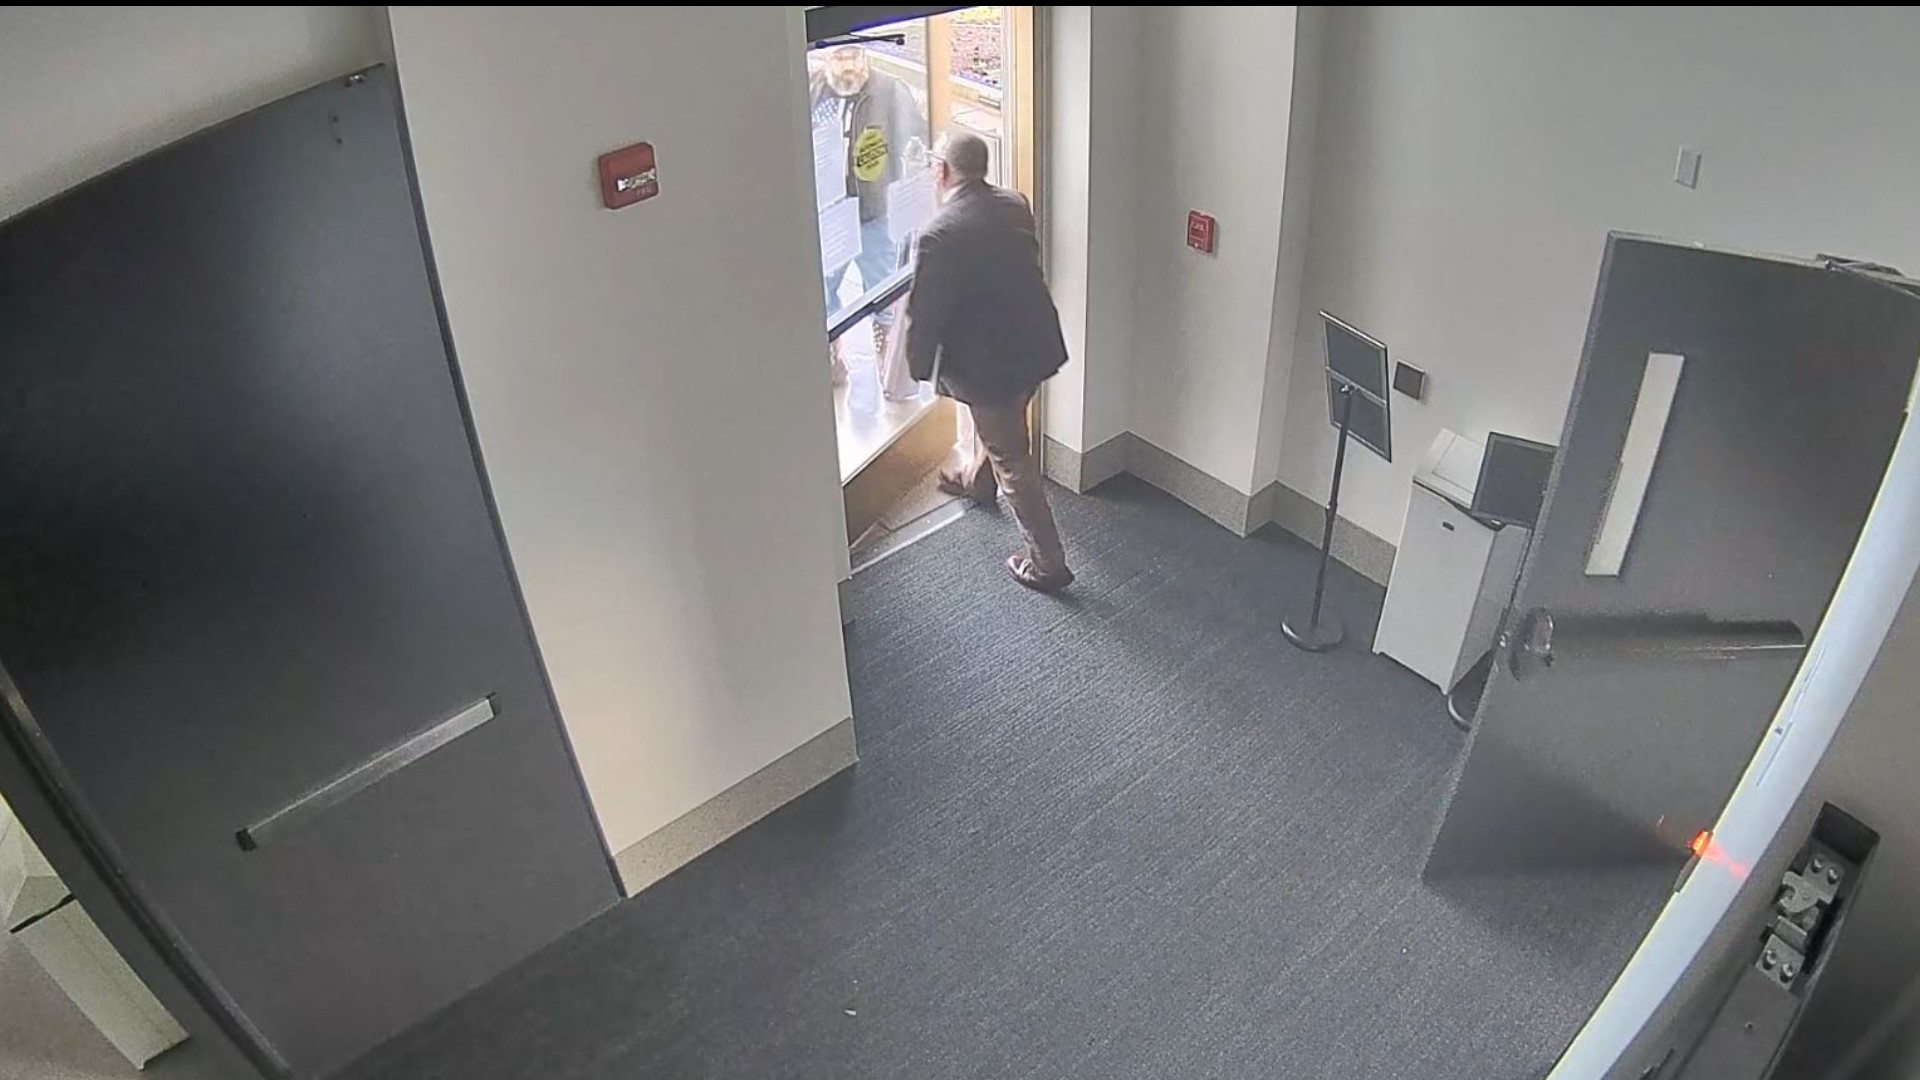 Security footage from inside the Oregon Capitol shows GOP state Rep. Mike Nearman opening the door and allowing armed far-right demonstrators inside.